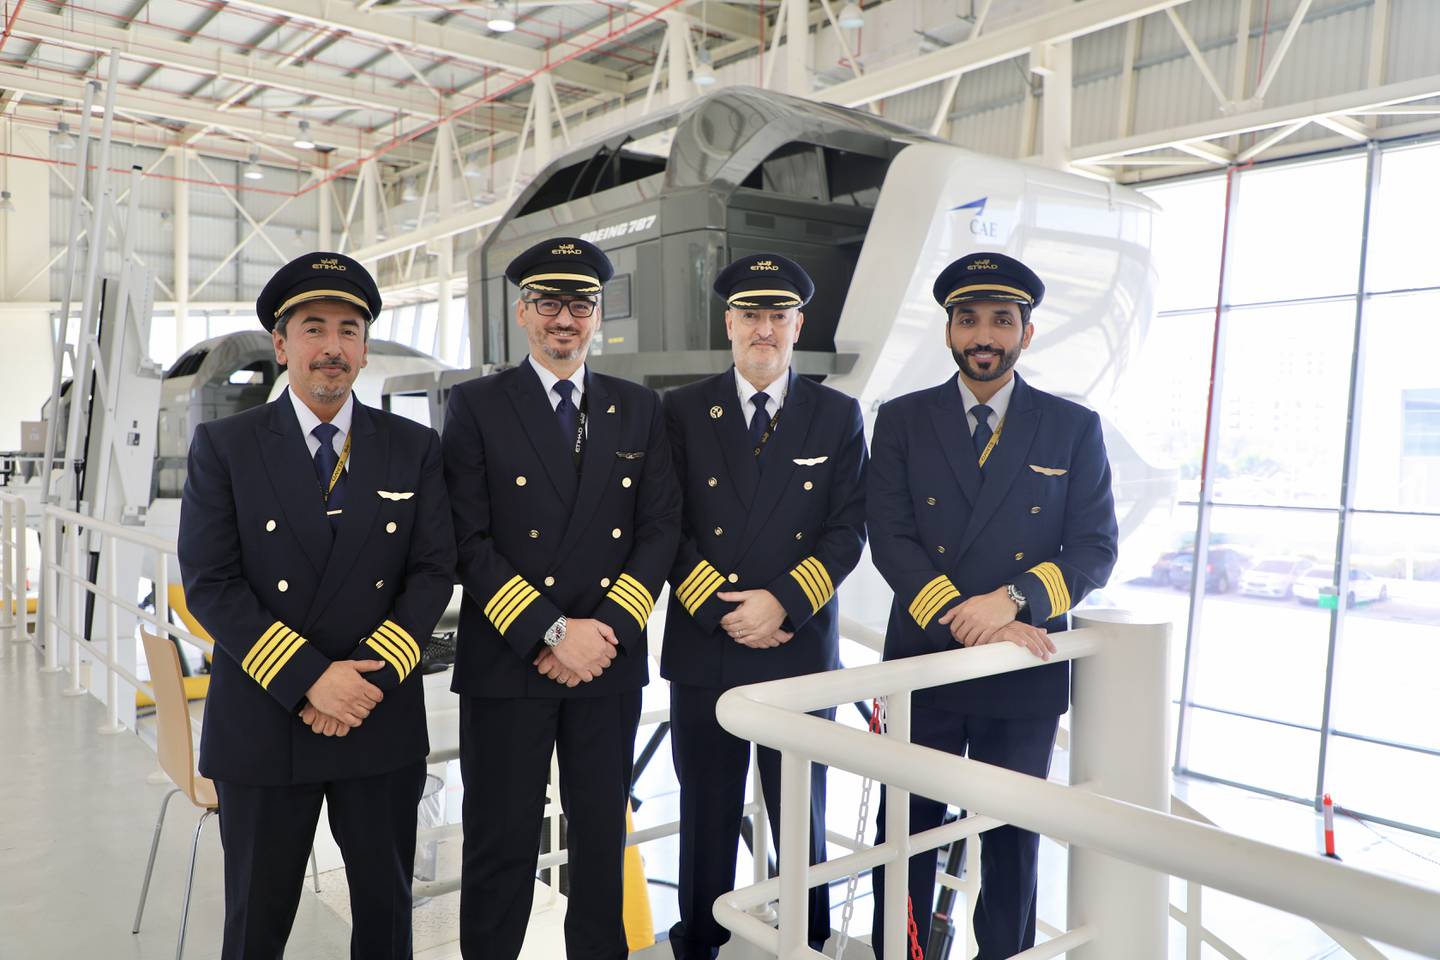 From left to right: Etihad Airways captains Abdulla Saleh, Mimmo Catalano, Driss Moussaoui and Mohammed Al Tamimi in front of a Boeing 787 simulator. Nilanjana Gupta / The National